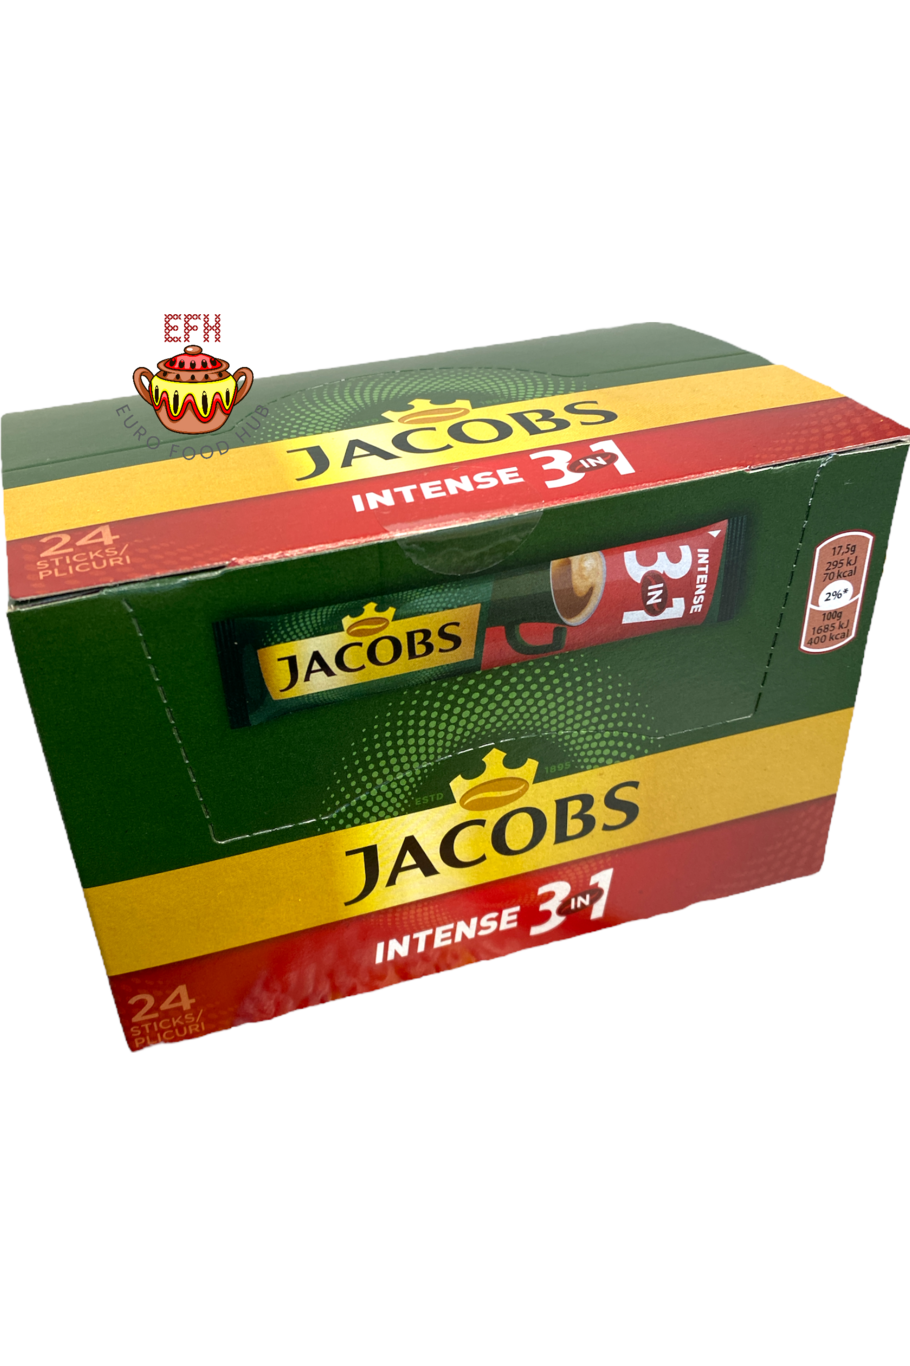 Jacobs Instant 3 in 1 Coffee -INTENSE- Singles or Box